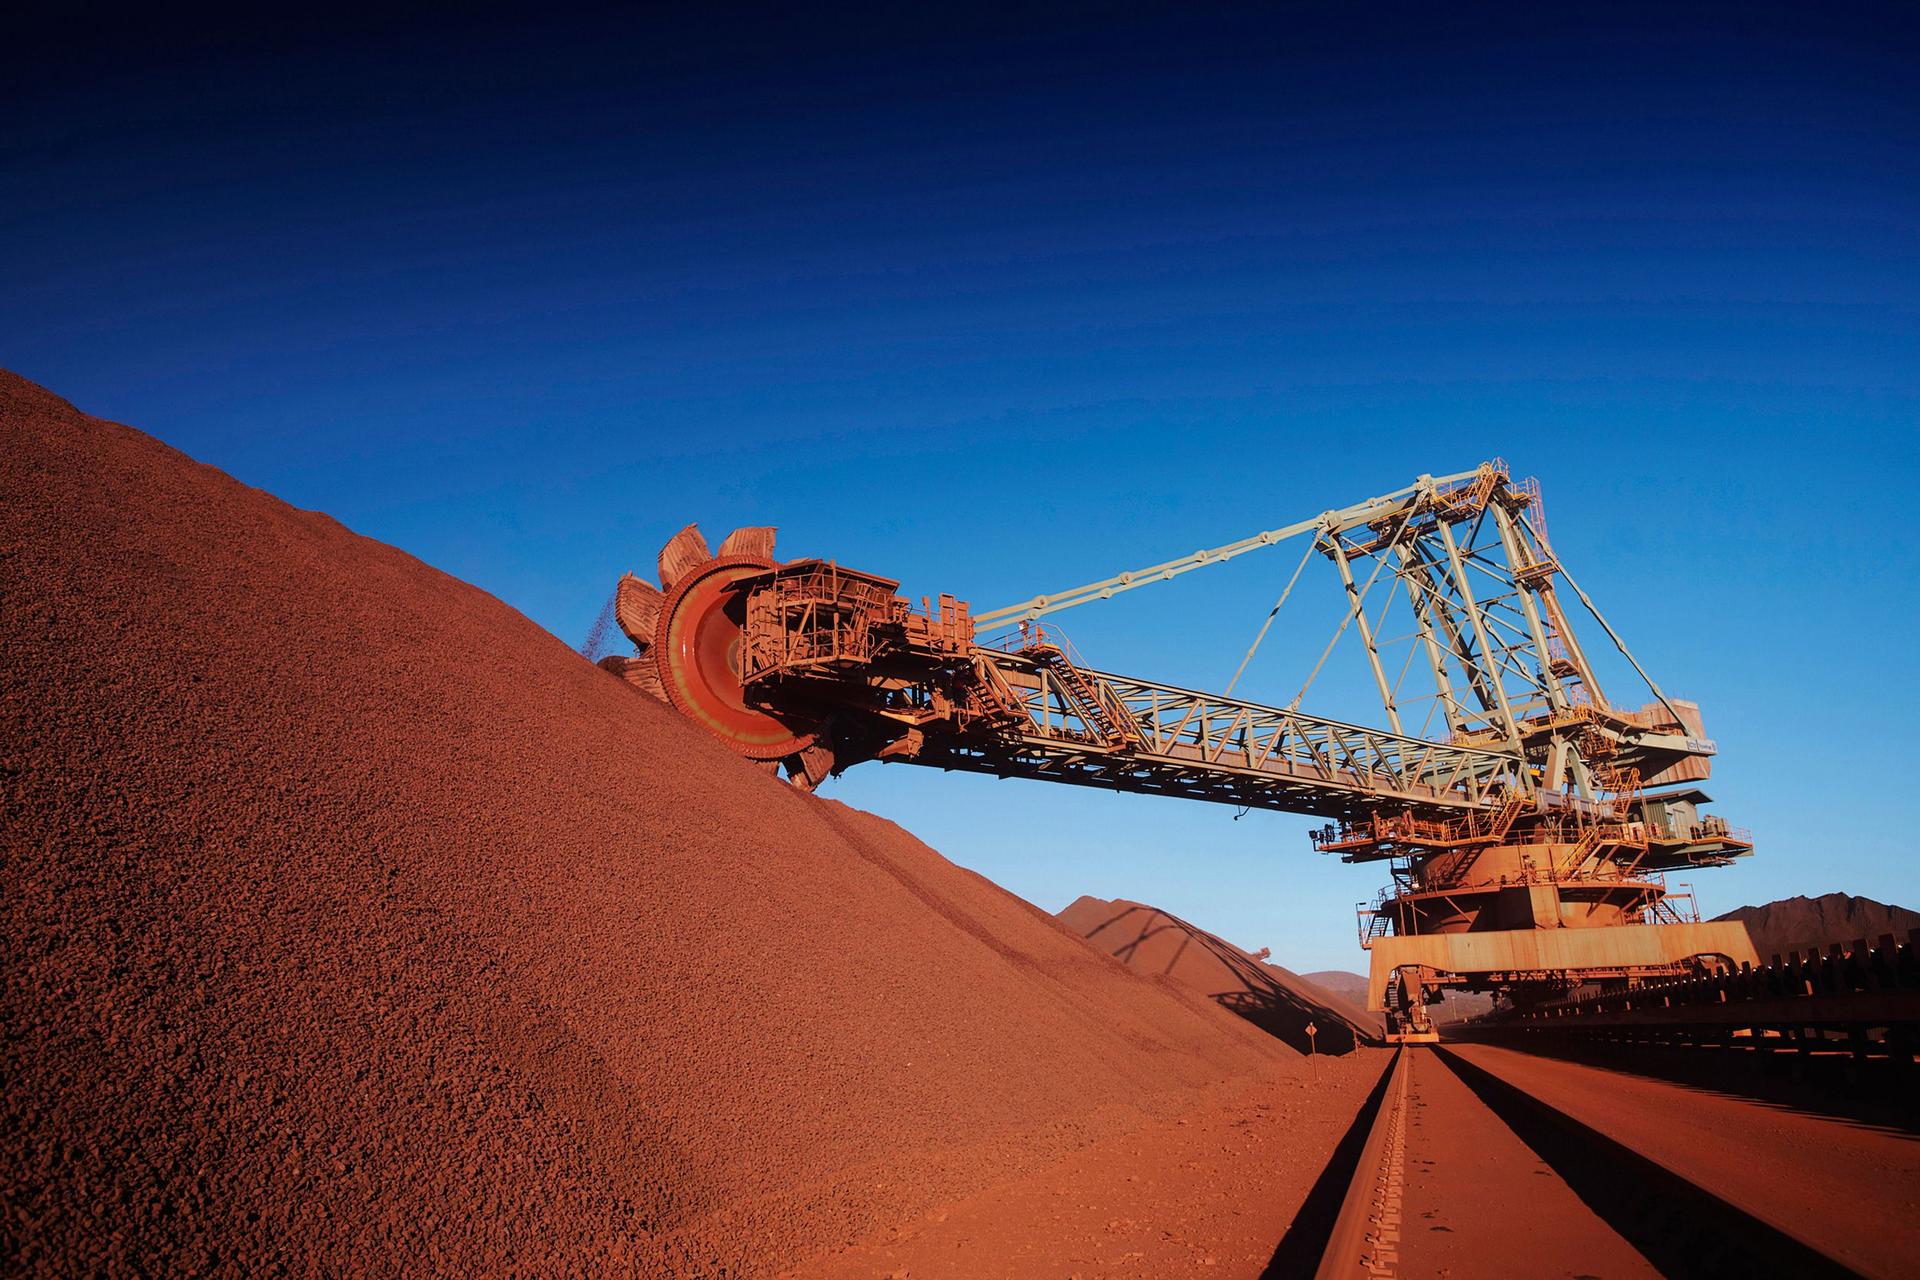 BHP Billiton's Mount Newman iron ore mine in Western Australia. Investors hailed better-than-expected half-year results in iron ore, the company's biggest earner. Photo: AFP